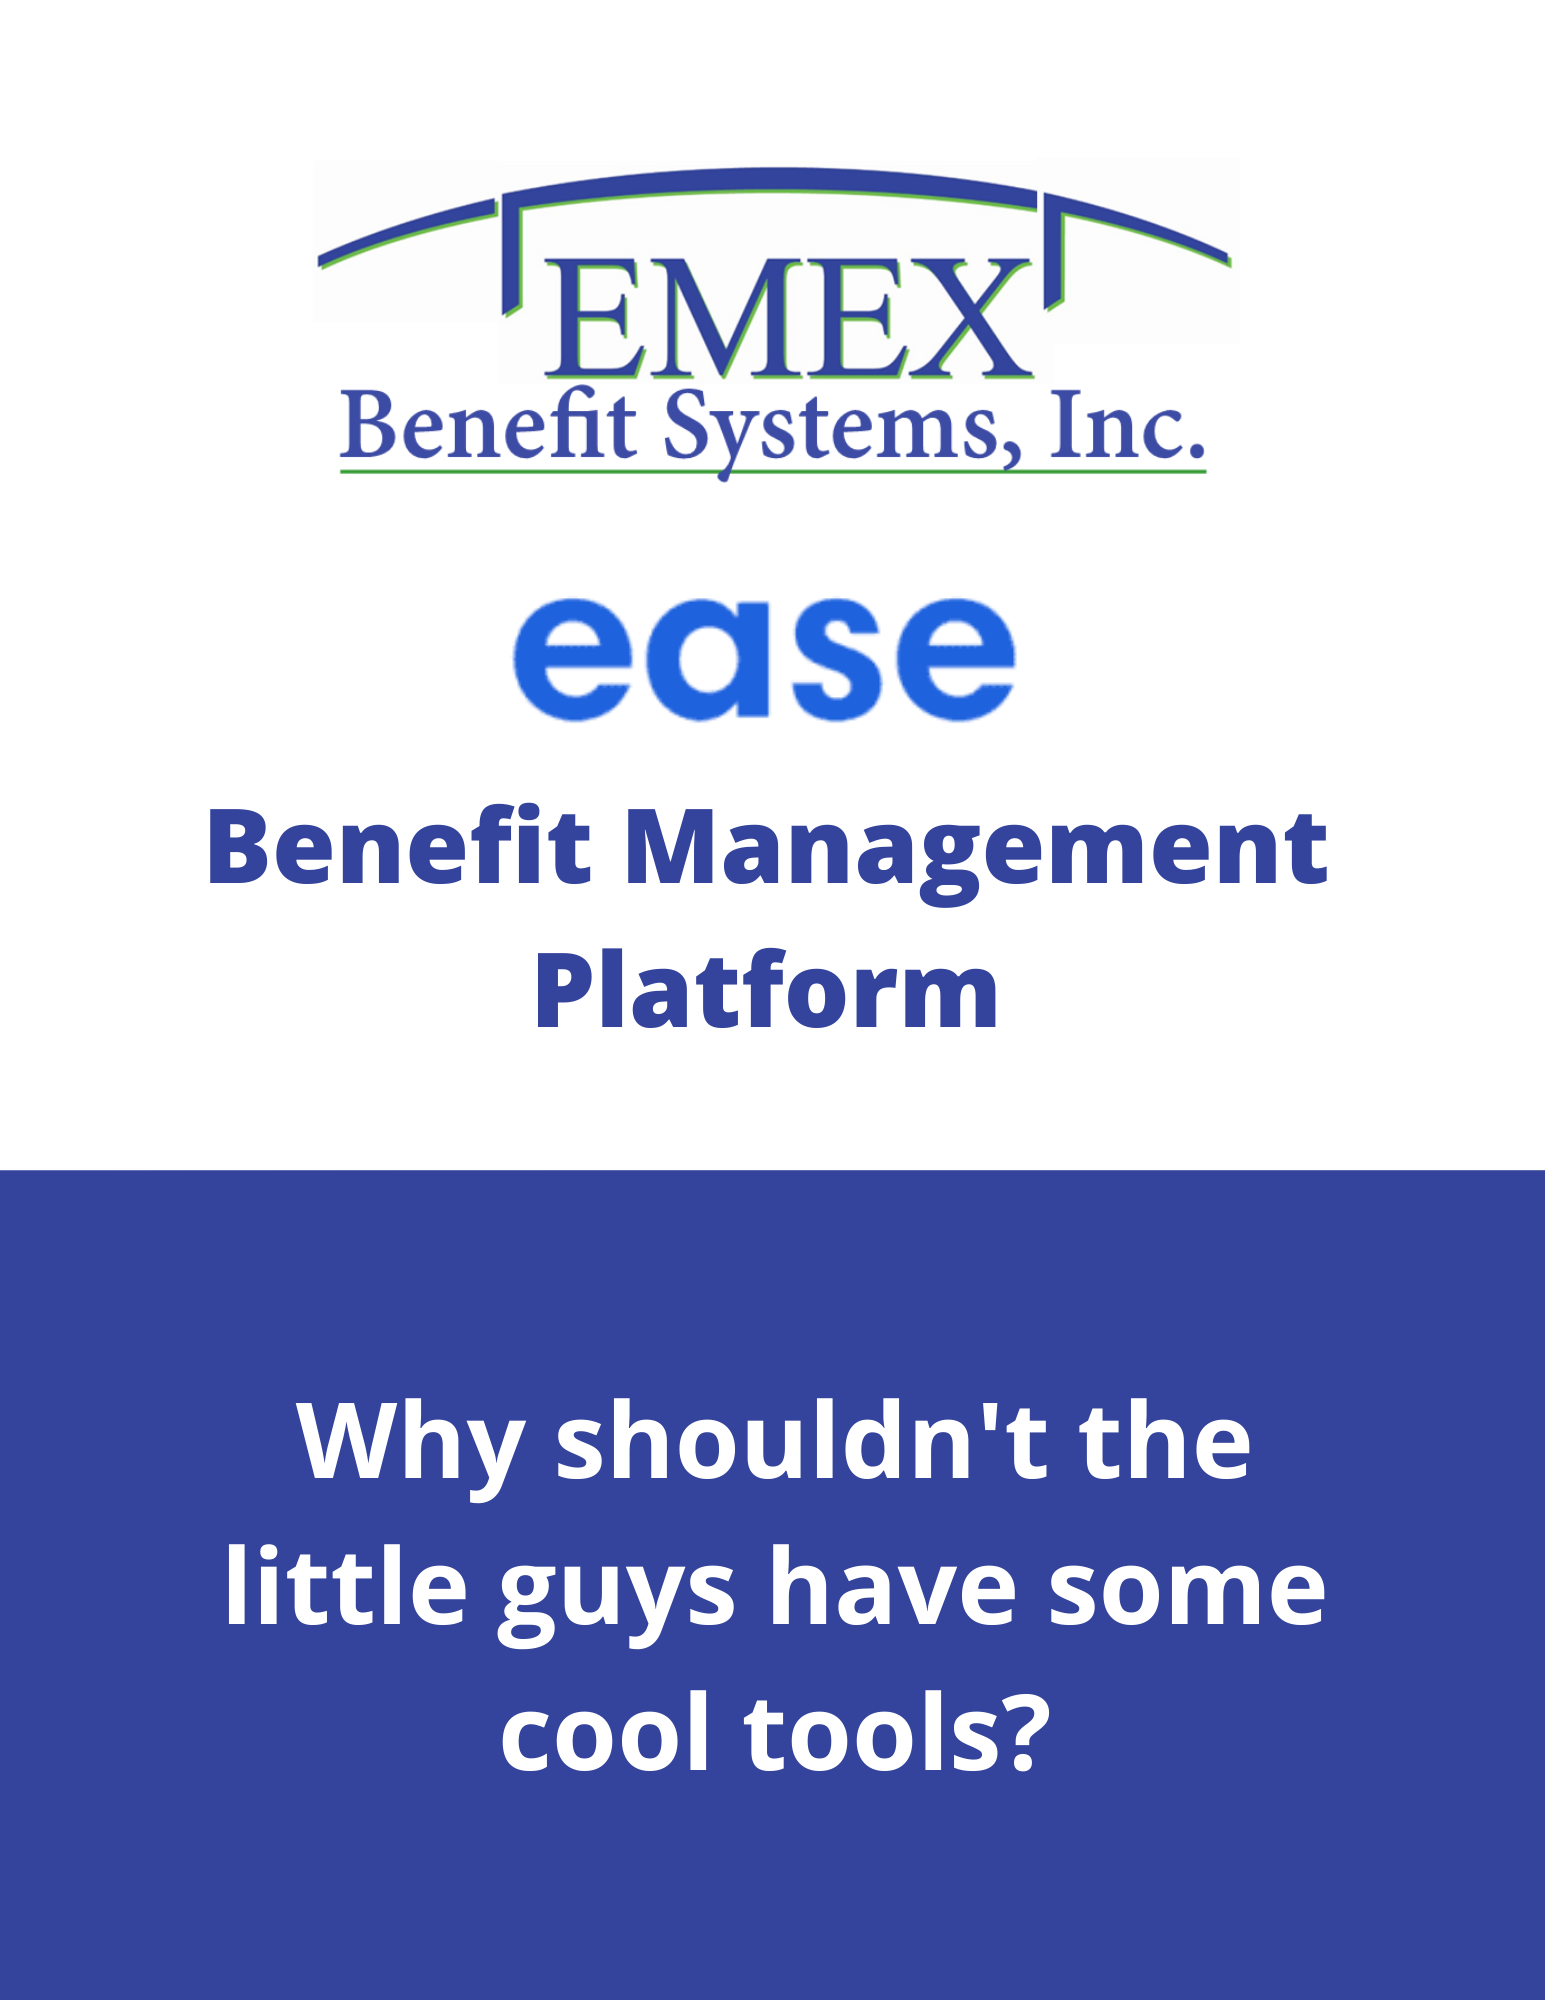 Onboarding New Benefits— St Michael, MN — EMEX Benefits Systems